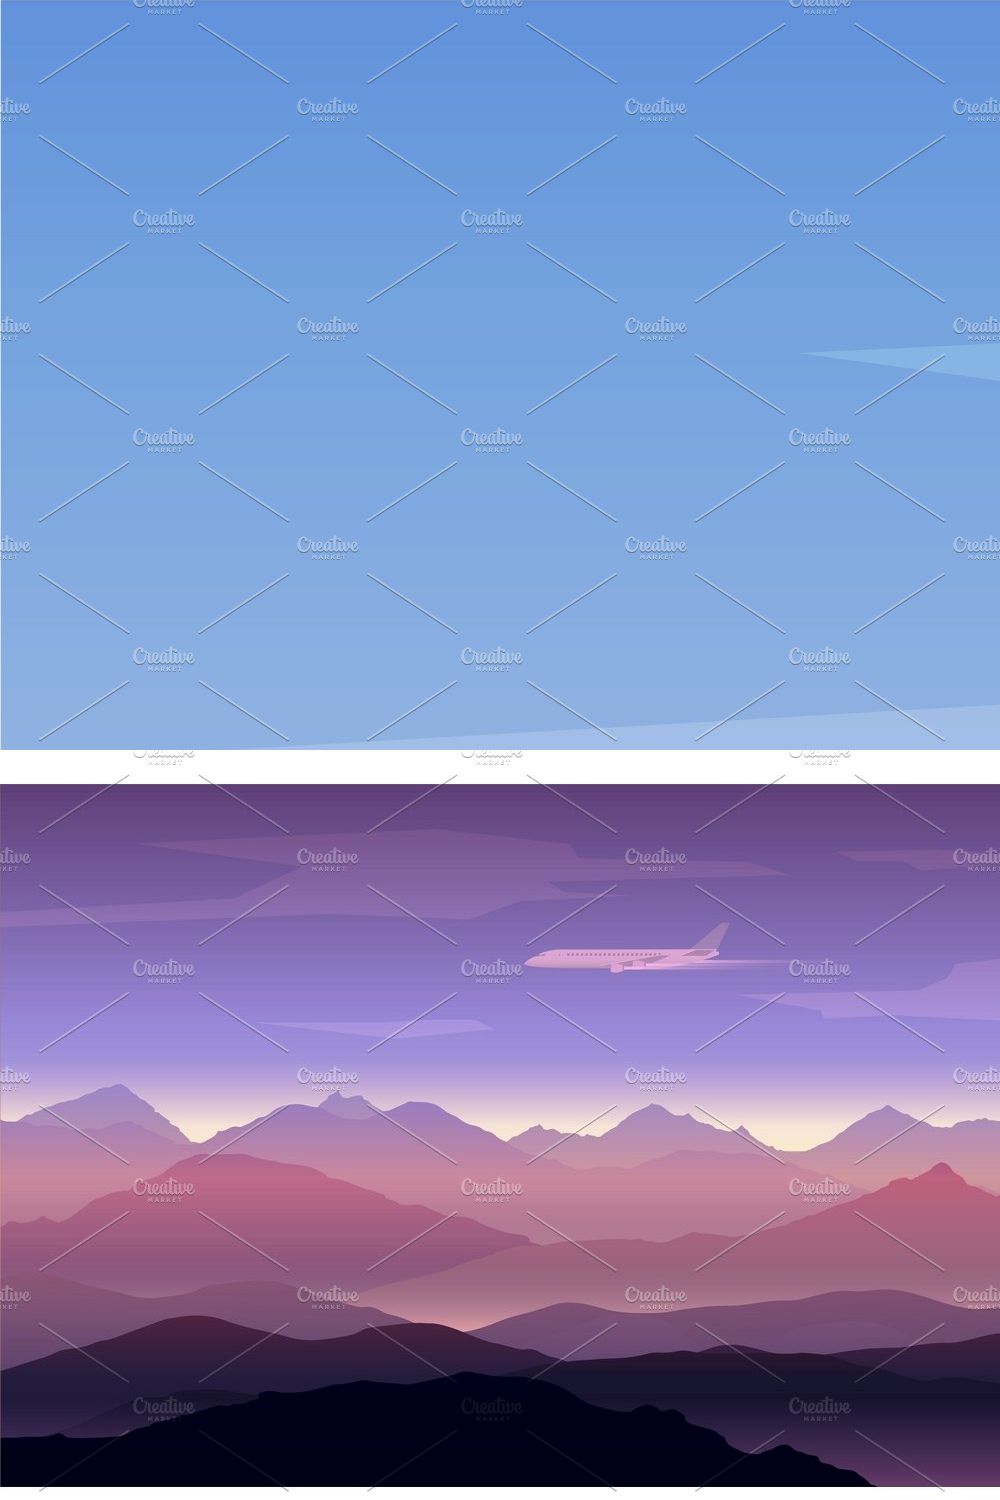 Mountains background set pinterest preview image.